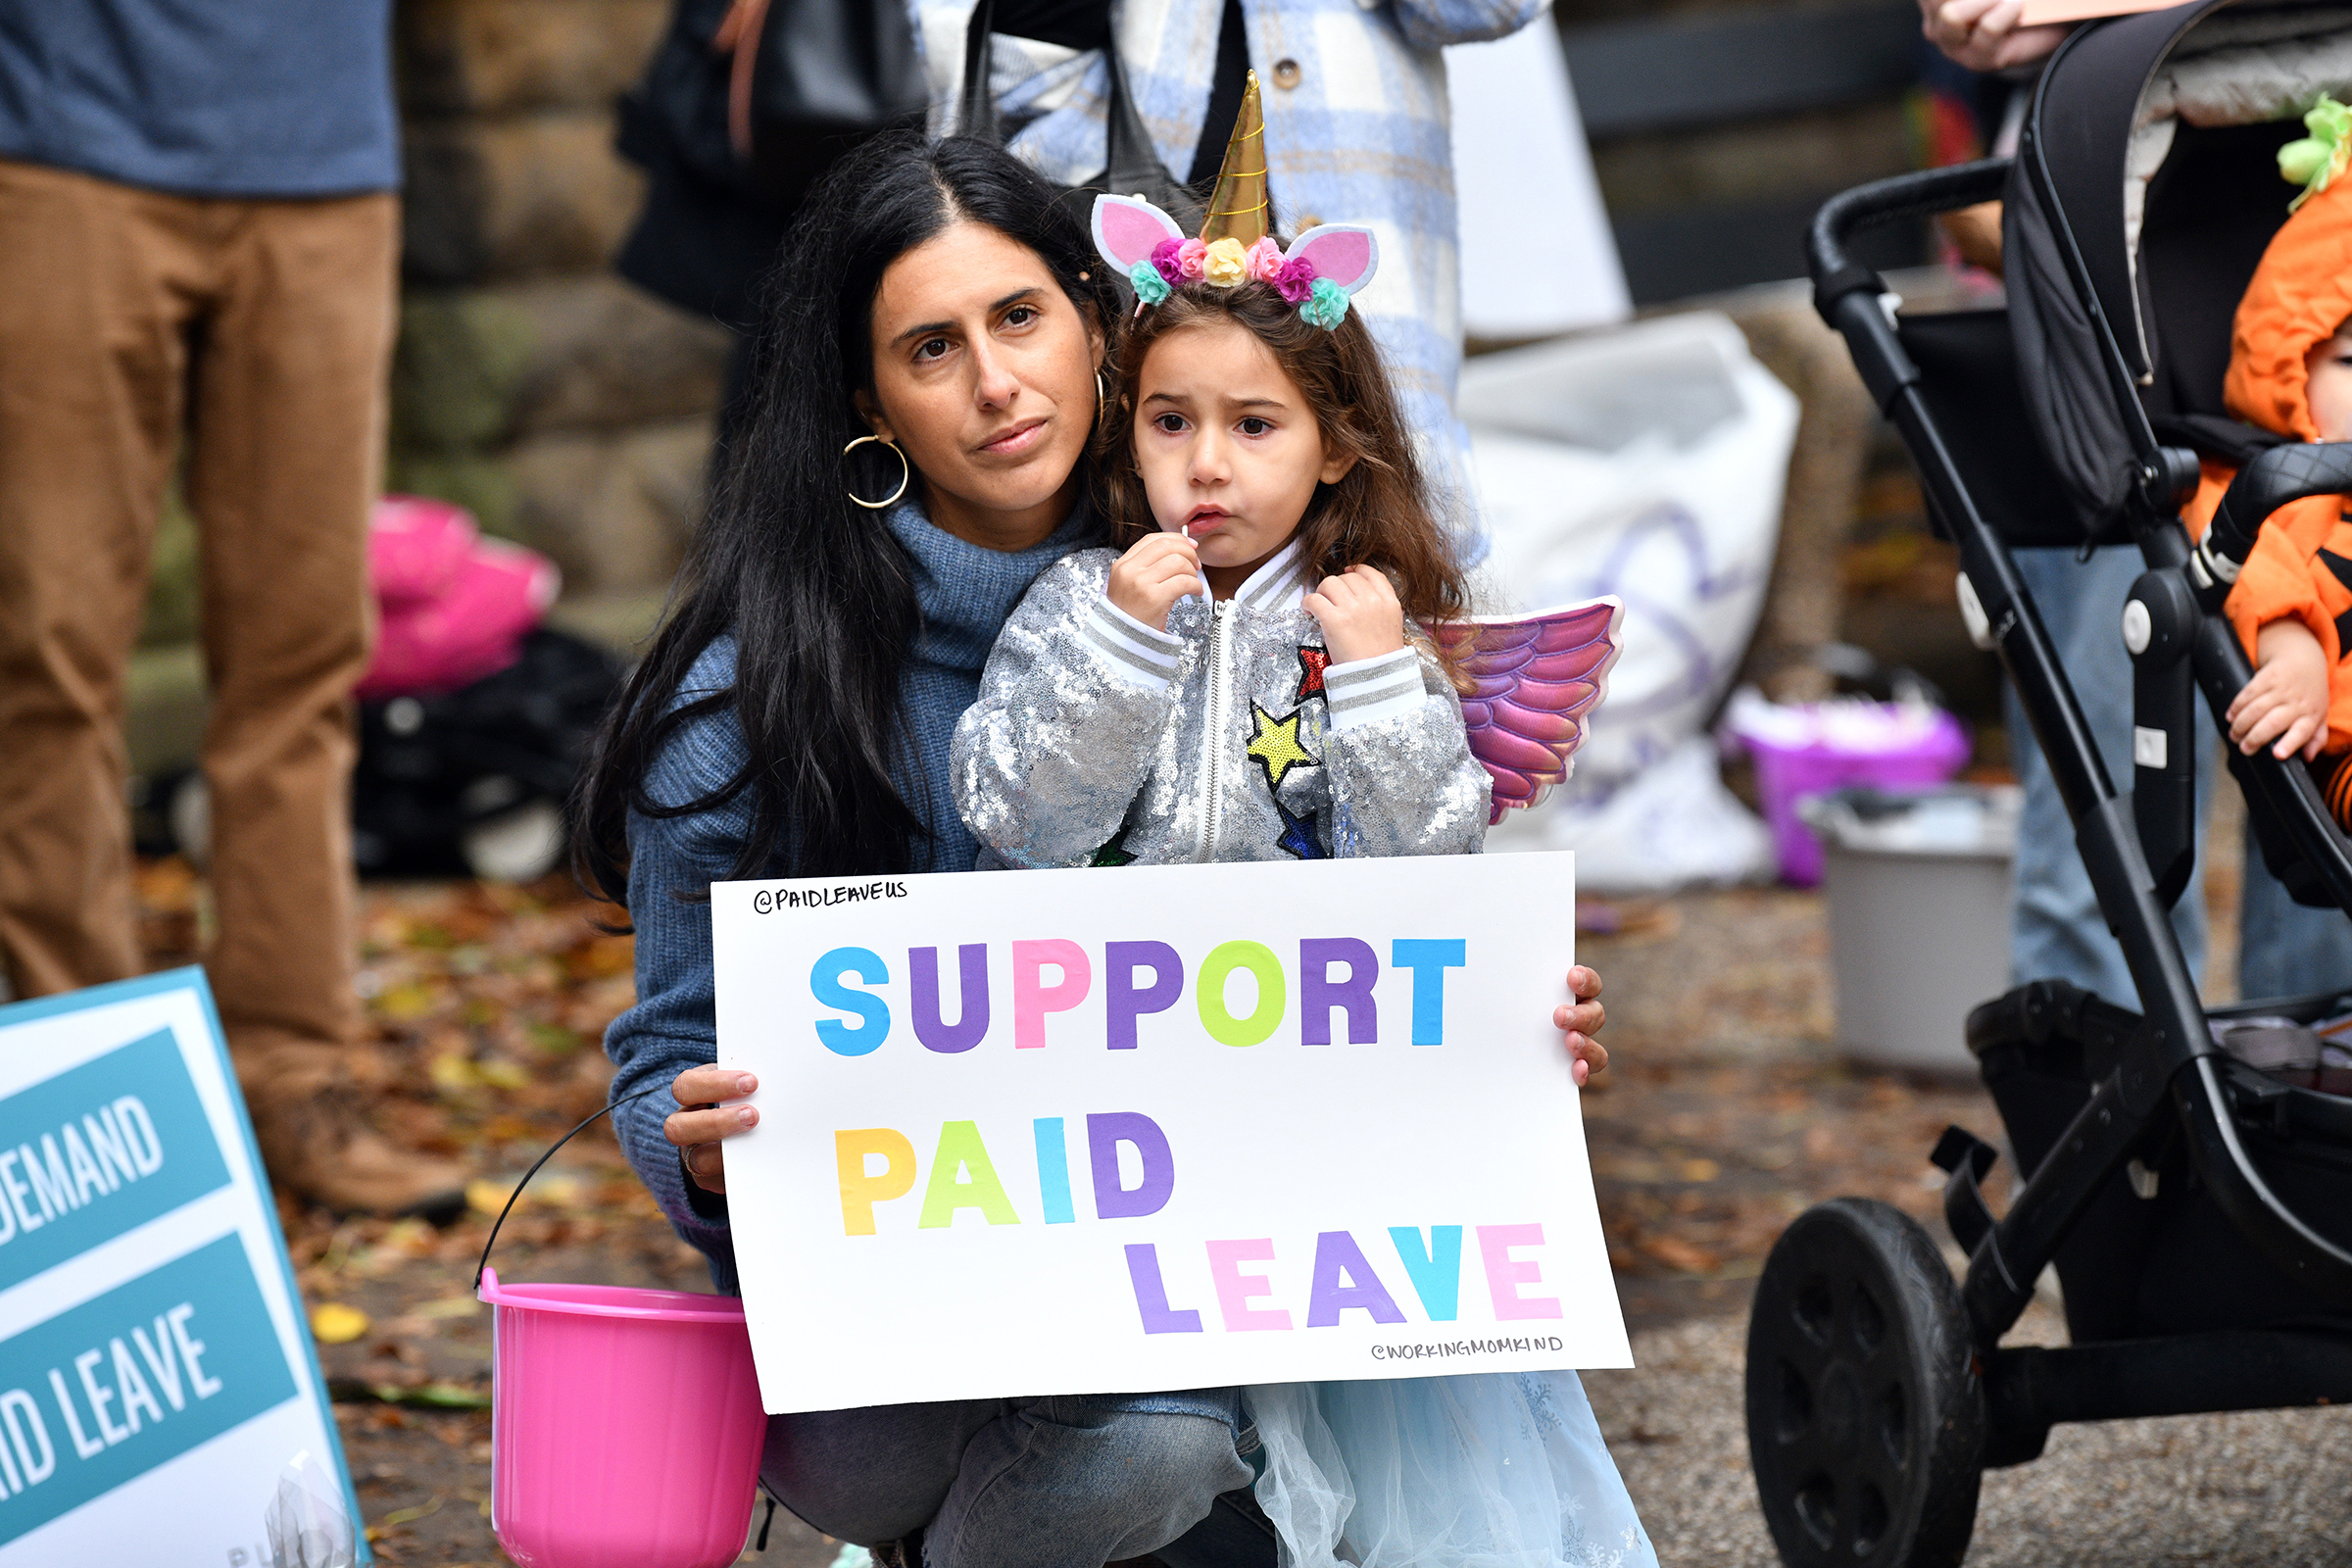 NYC Families, Parents, Caregivers Bring Kids, New Babies To Show Support For Paid Family Leave